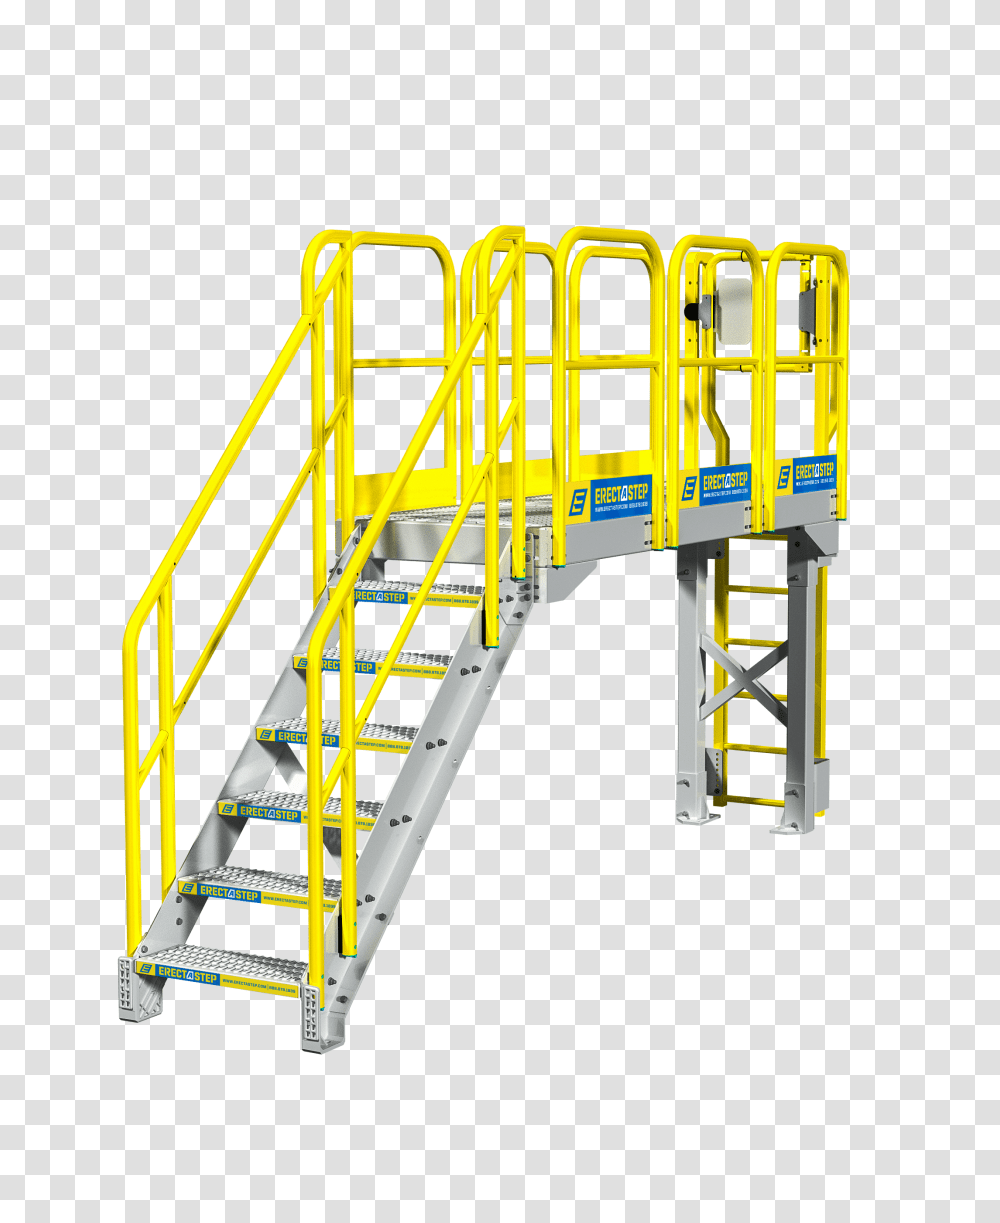 Download Hd Industrial Catwalk Stair Catwalk Stairs, Handrail, Banister, Construction Crane, Play Area Transparent Png